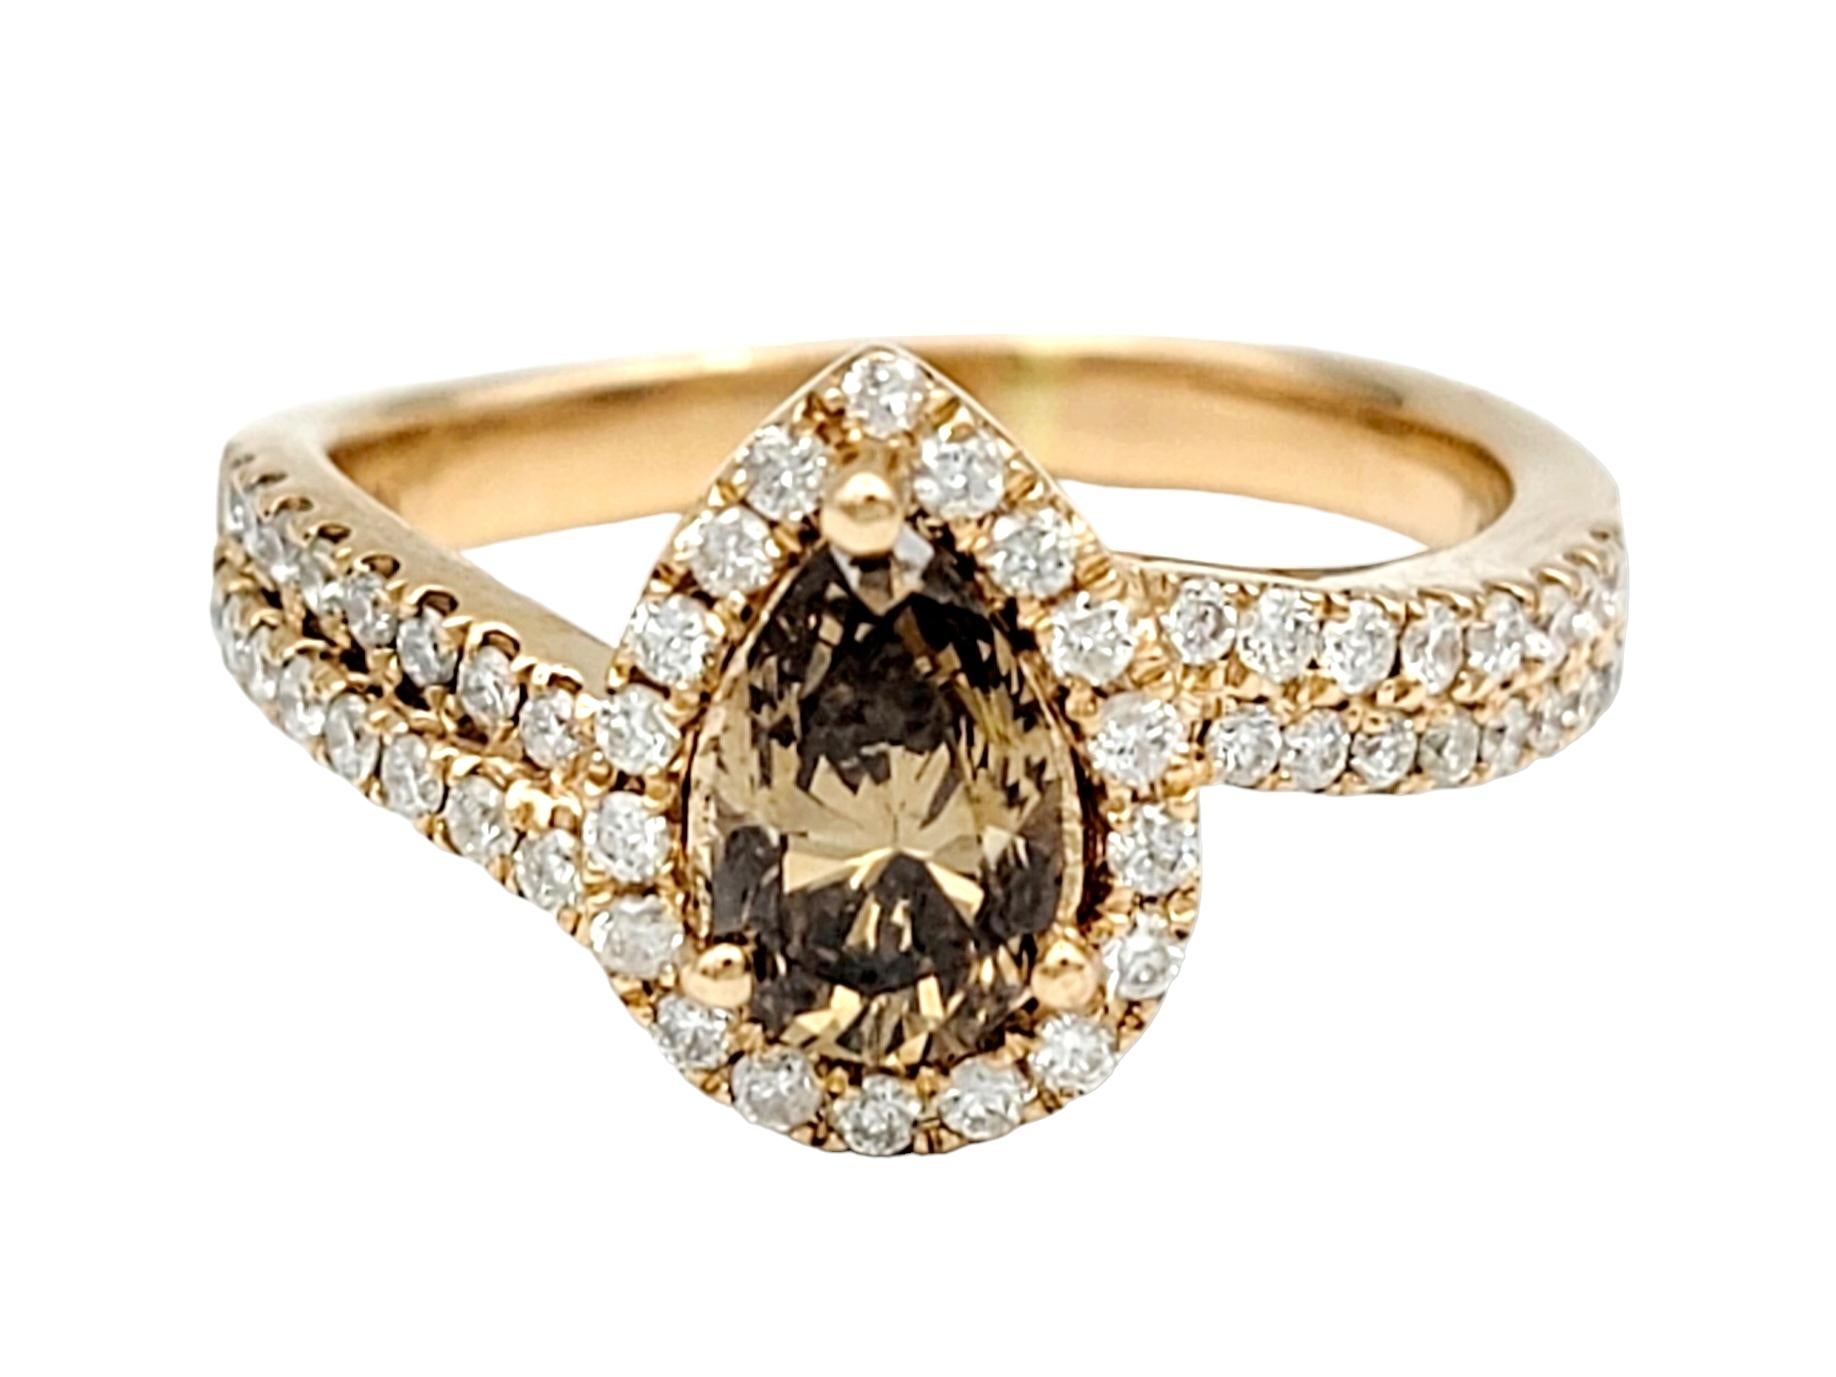 Ring Size: 5.25

This rich, warm and captivating cocktail ring, set in the embrace of 14 karat rose gold, is a must-have piece. The centerpiece is a striking pear-cut Fancy brown cognac diamond, an exquisite gemstone that emanates a unique and